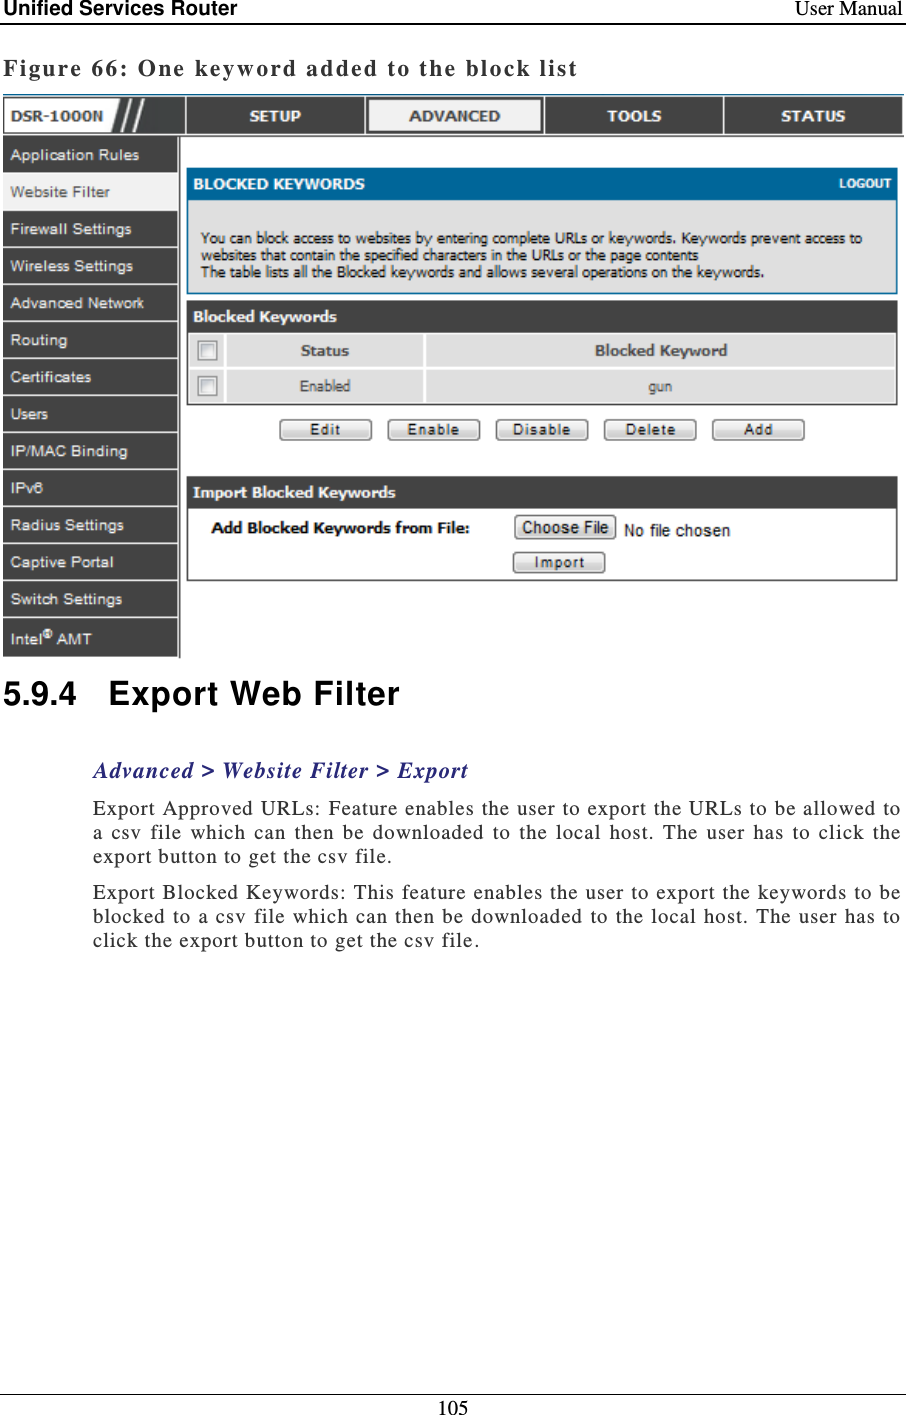 Unified Services Router    User Manual 105  Figure 66: One keyword added to t he bloc k list   5.9.4  Export Web Filter Advanced &gt; Website Filter &gt; Export Export Approved URLs: Feature enables the user to export the URLs to be allowed to a  csv  file  which  can  then  be  downloaded  to  the  local  host.  The  user  has  to  click  the export button to get the csv file.  Export Blocked Keywords: This feature enables the user to export the keywords to be blocked to  a csv  file which  can then  be  downloaded to the  local host. The  user has  to click the export button to get the csv file . 